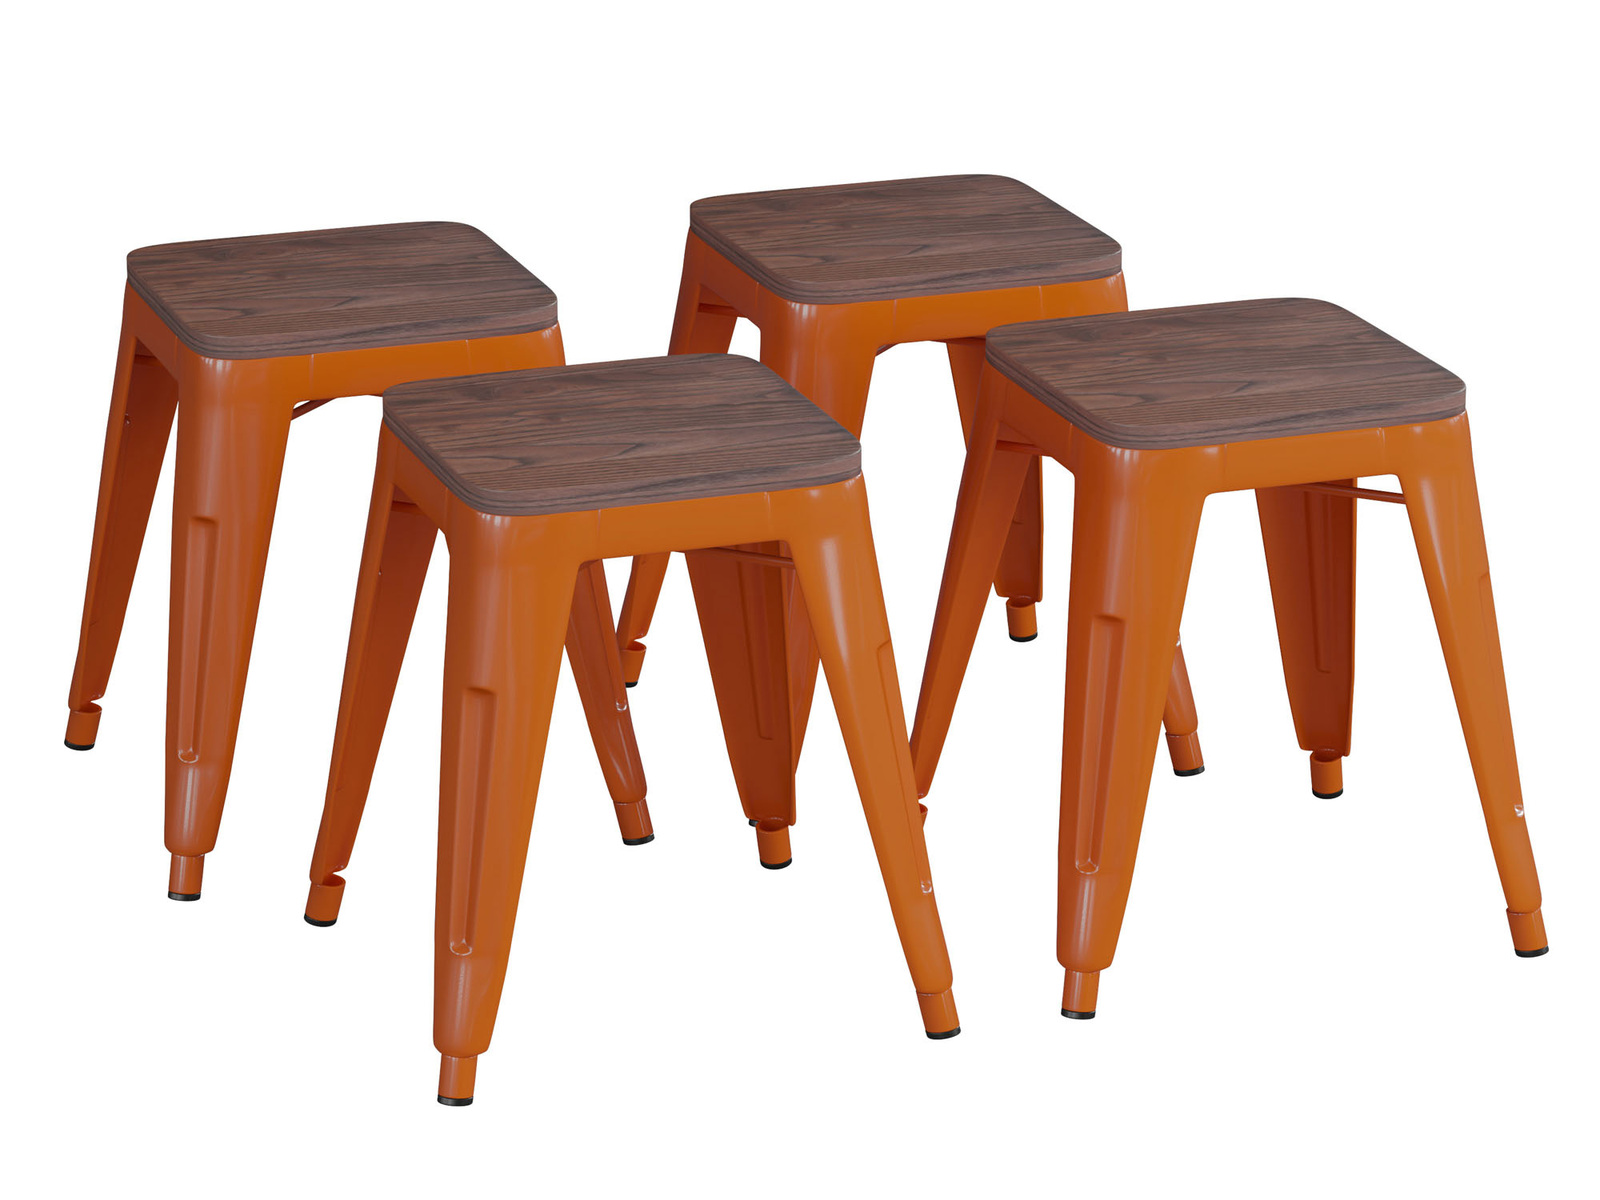 Primary image for 18" Backless Table Height Stool with Wooden Seat, Orange Dining Stool- Set of 4